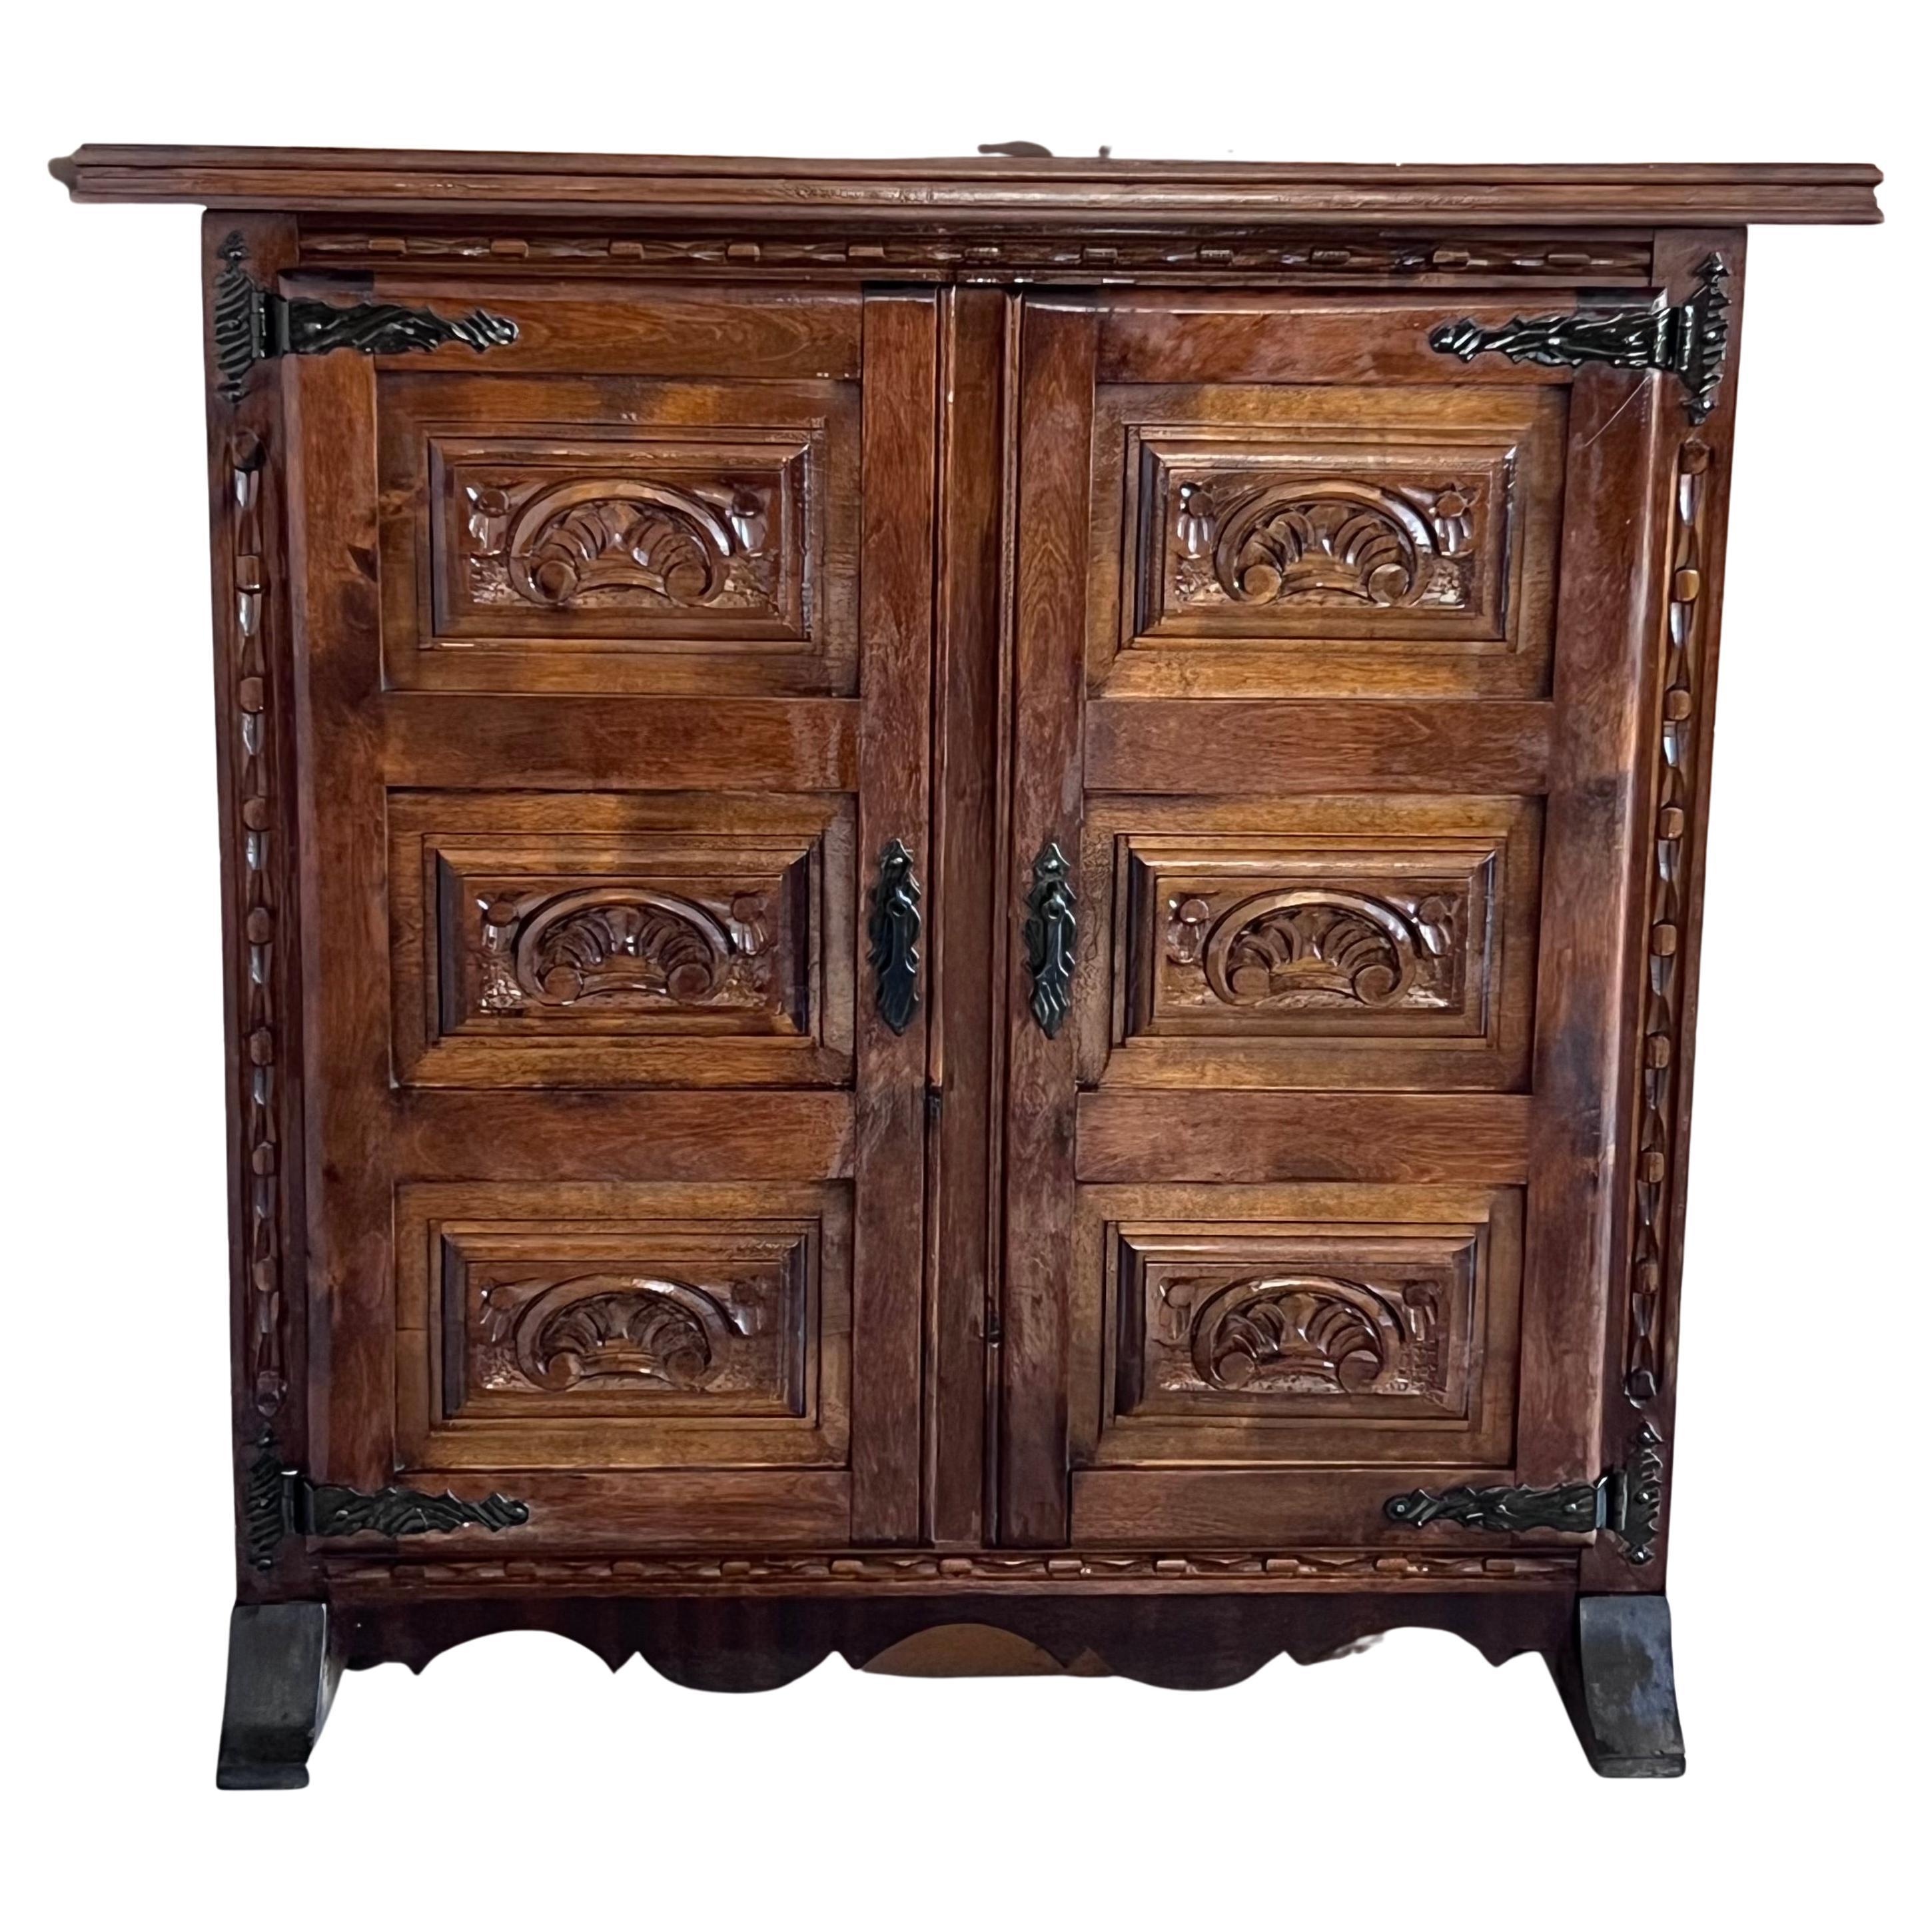 From Northern Spain, constructed of solid walnut, the rectangular top with molded edge atop a conforming case housing two carved doors paneled with solid walnut, raised on a plinth base.
Very heavy and original cabinet.

WE WILL RESTORE THE PIECE